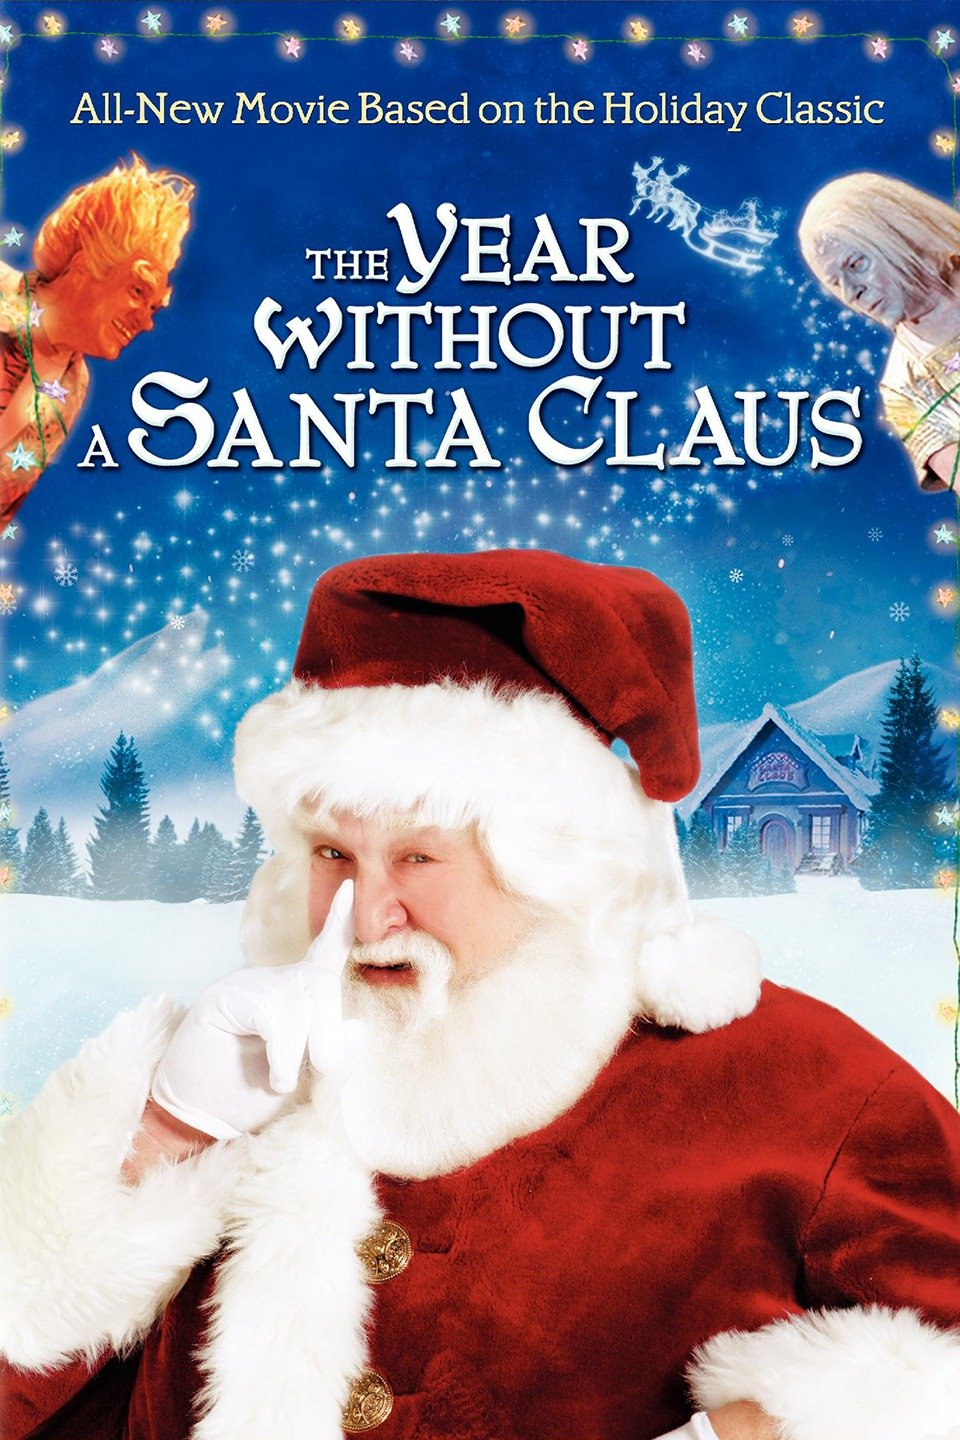 The Year Without a Santa Claus (2006) Screenshot 5